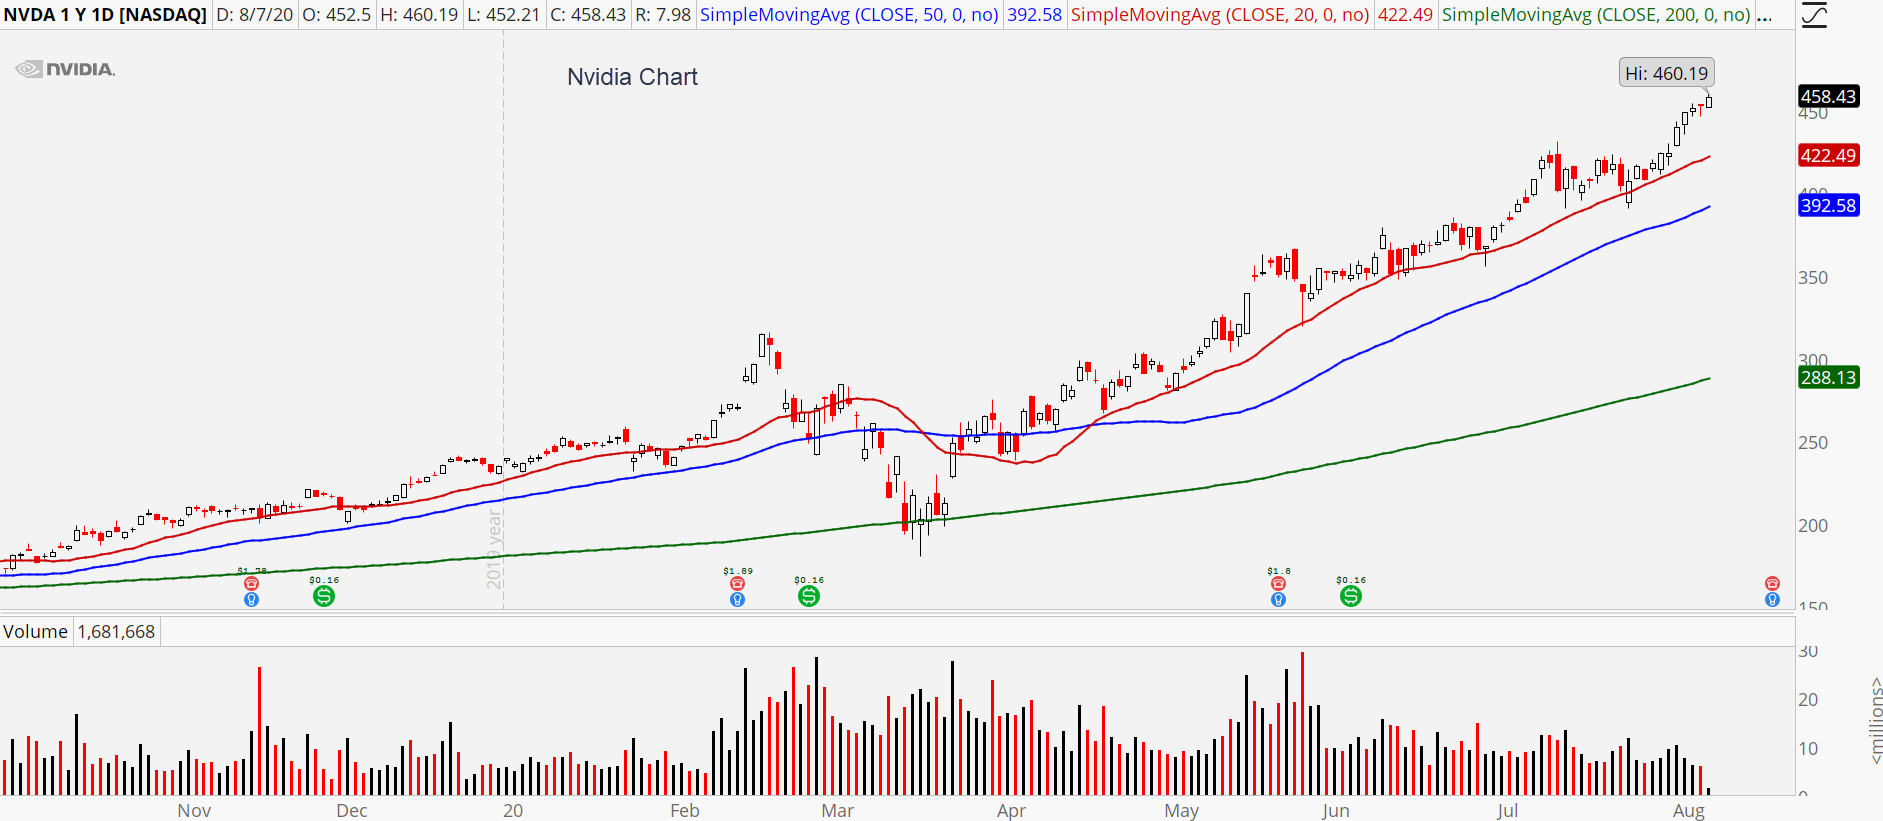 Nvidia (NVDA) stock chart showing overbought conditions